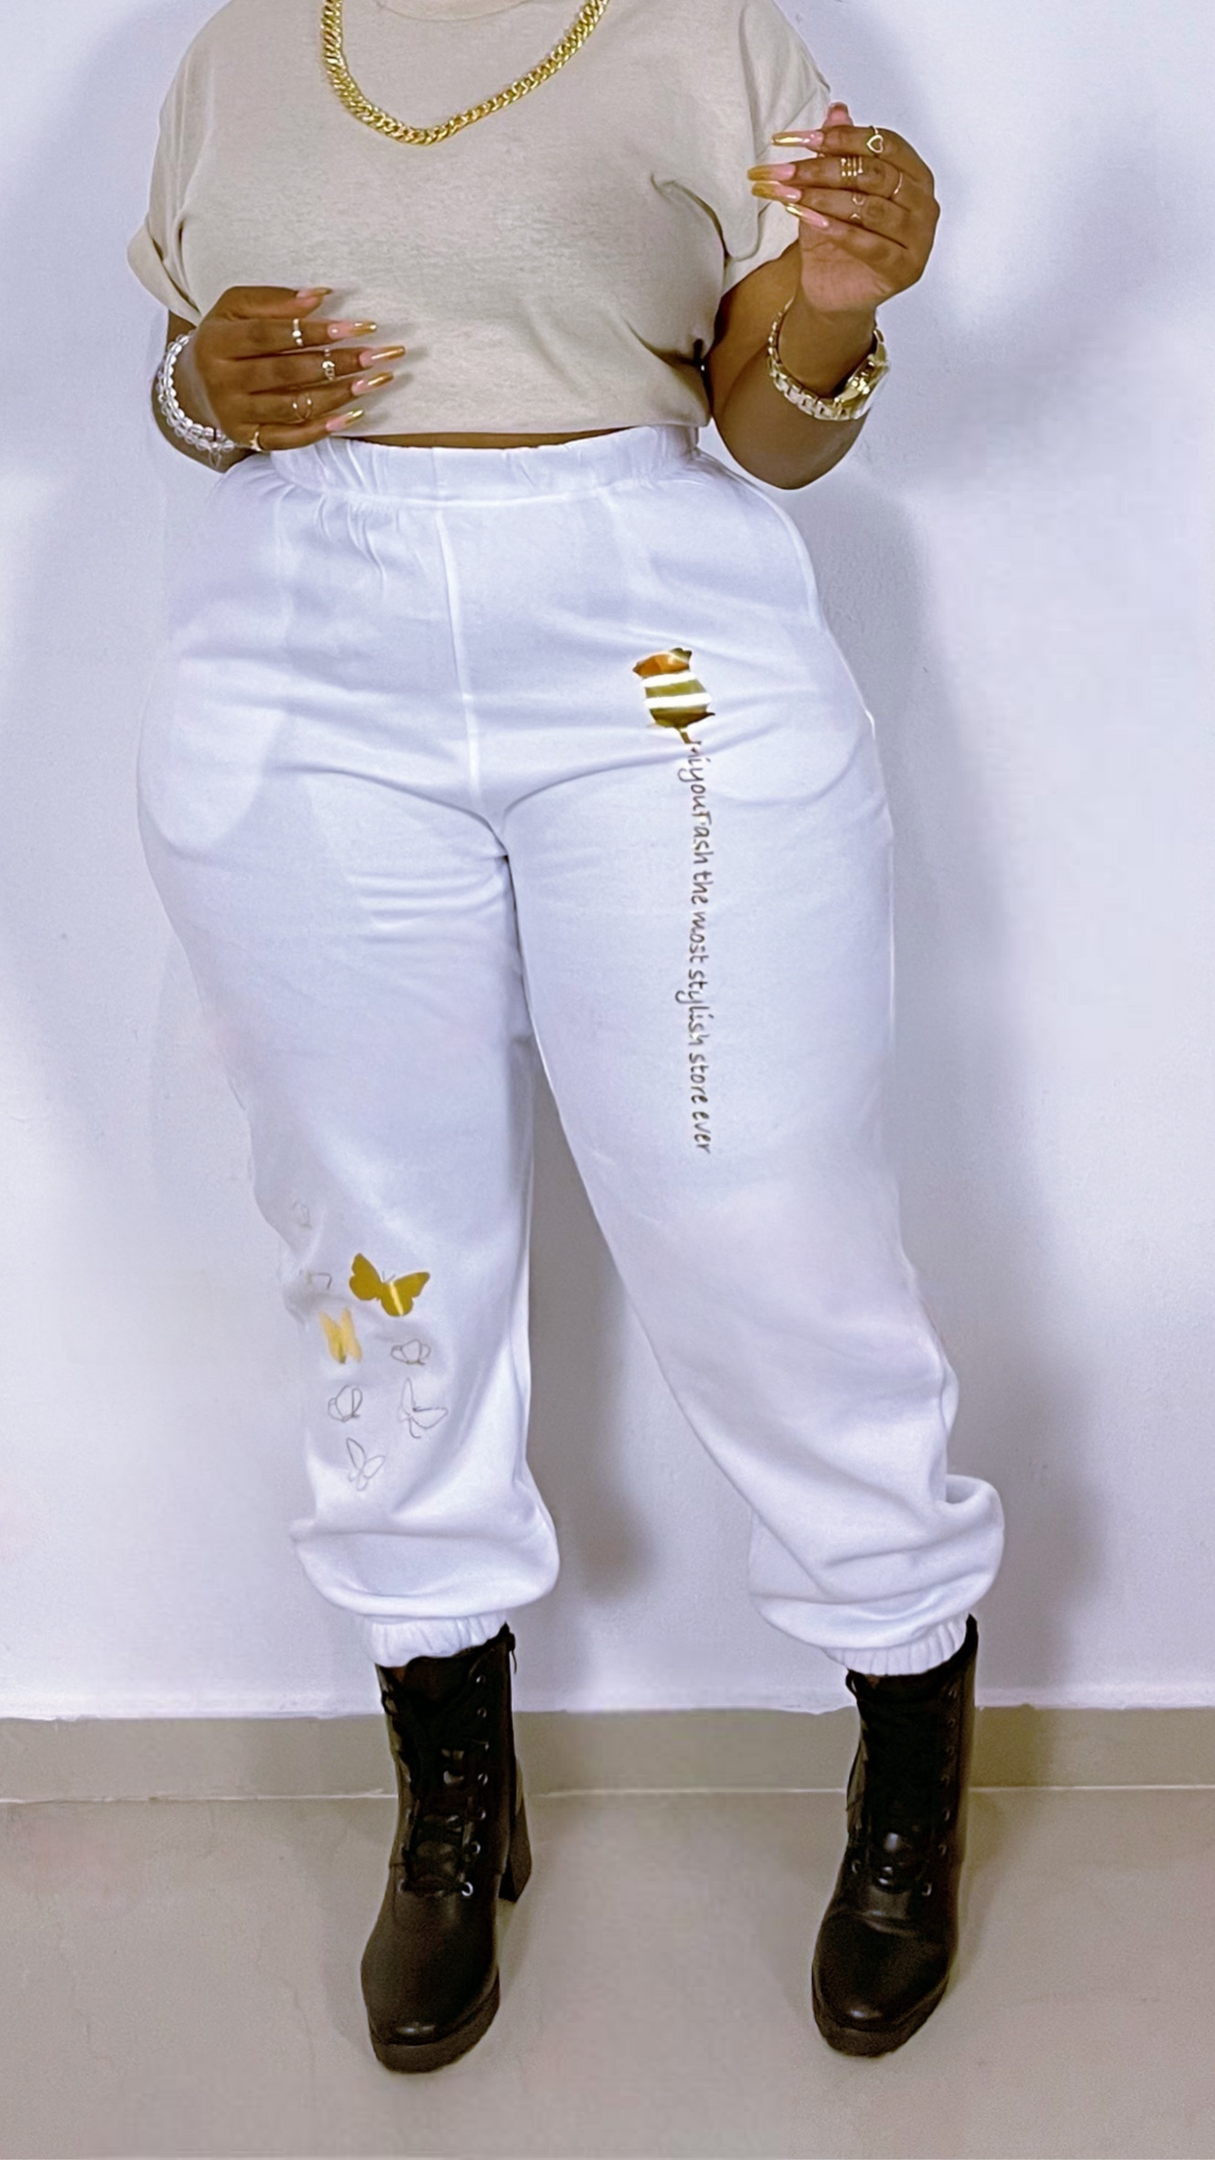 Hot Sweatpants with Gold Designs